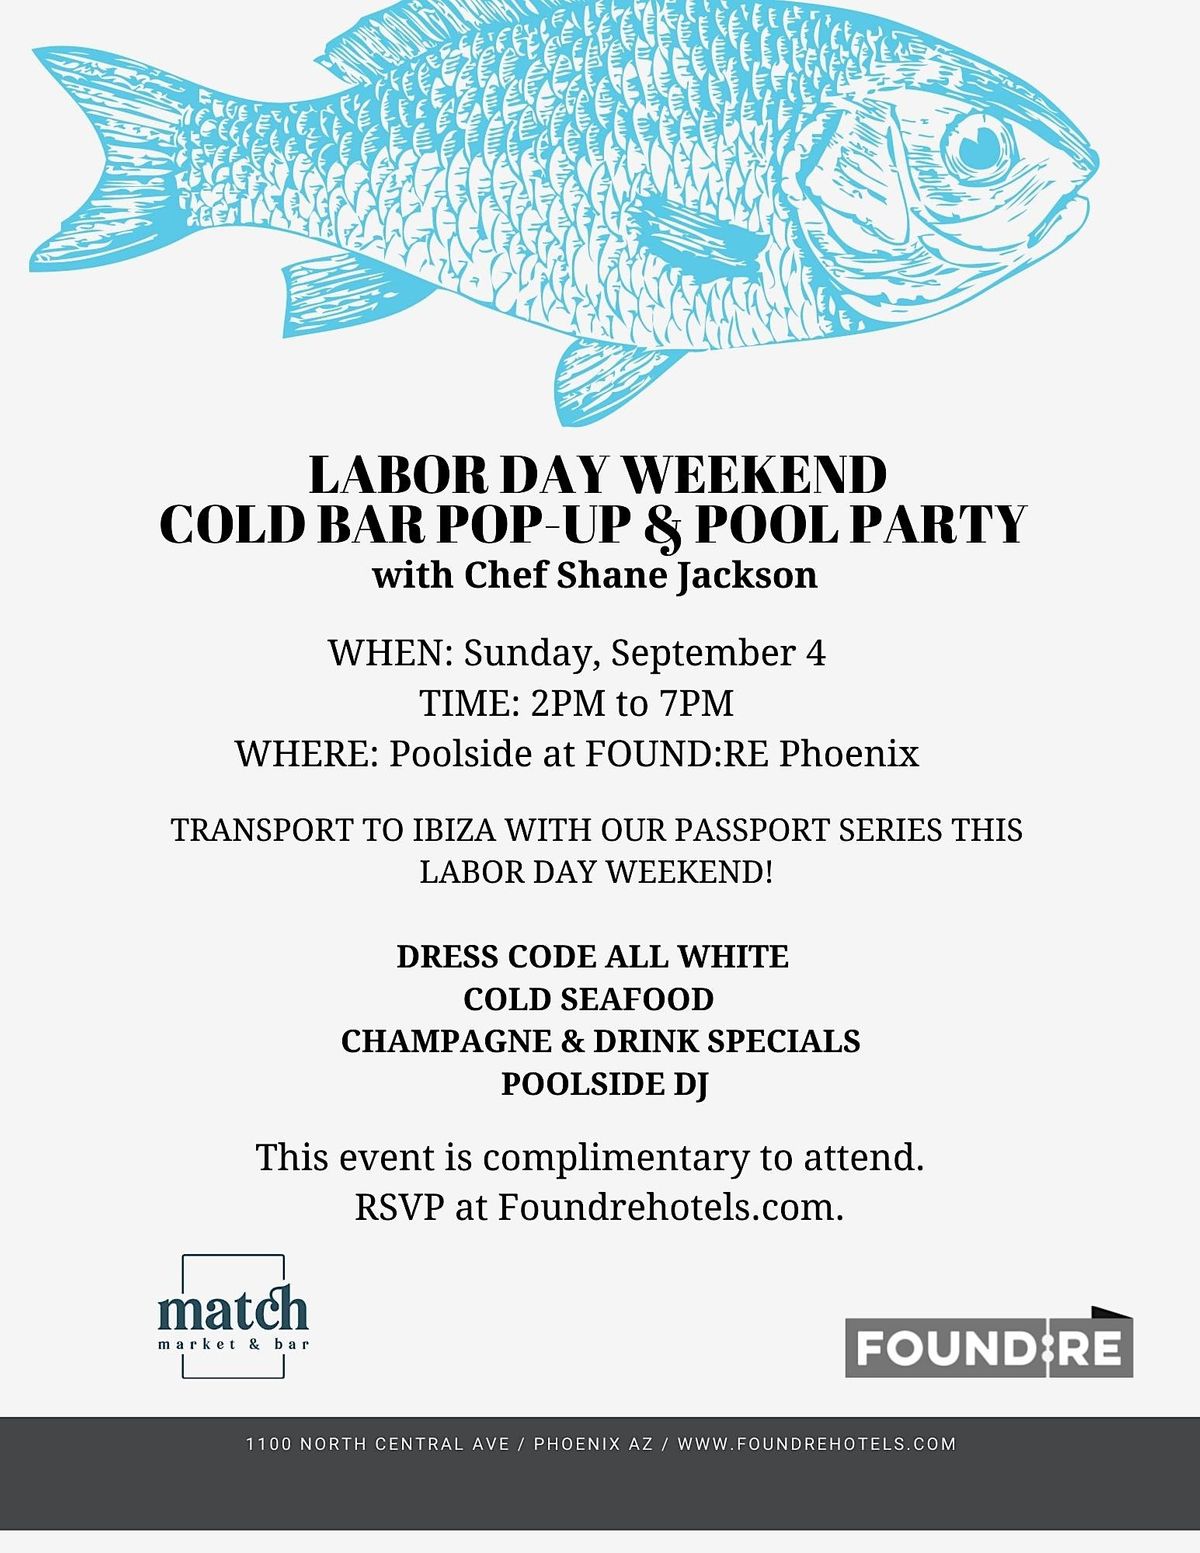 Labor Day Weekend Cold Bar Pop-up & Pool Party